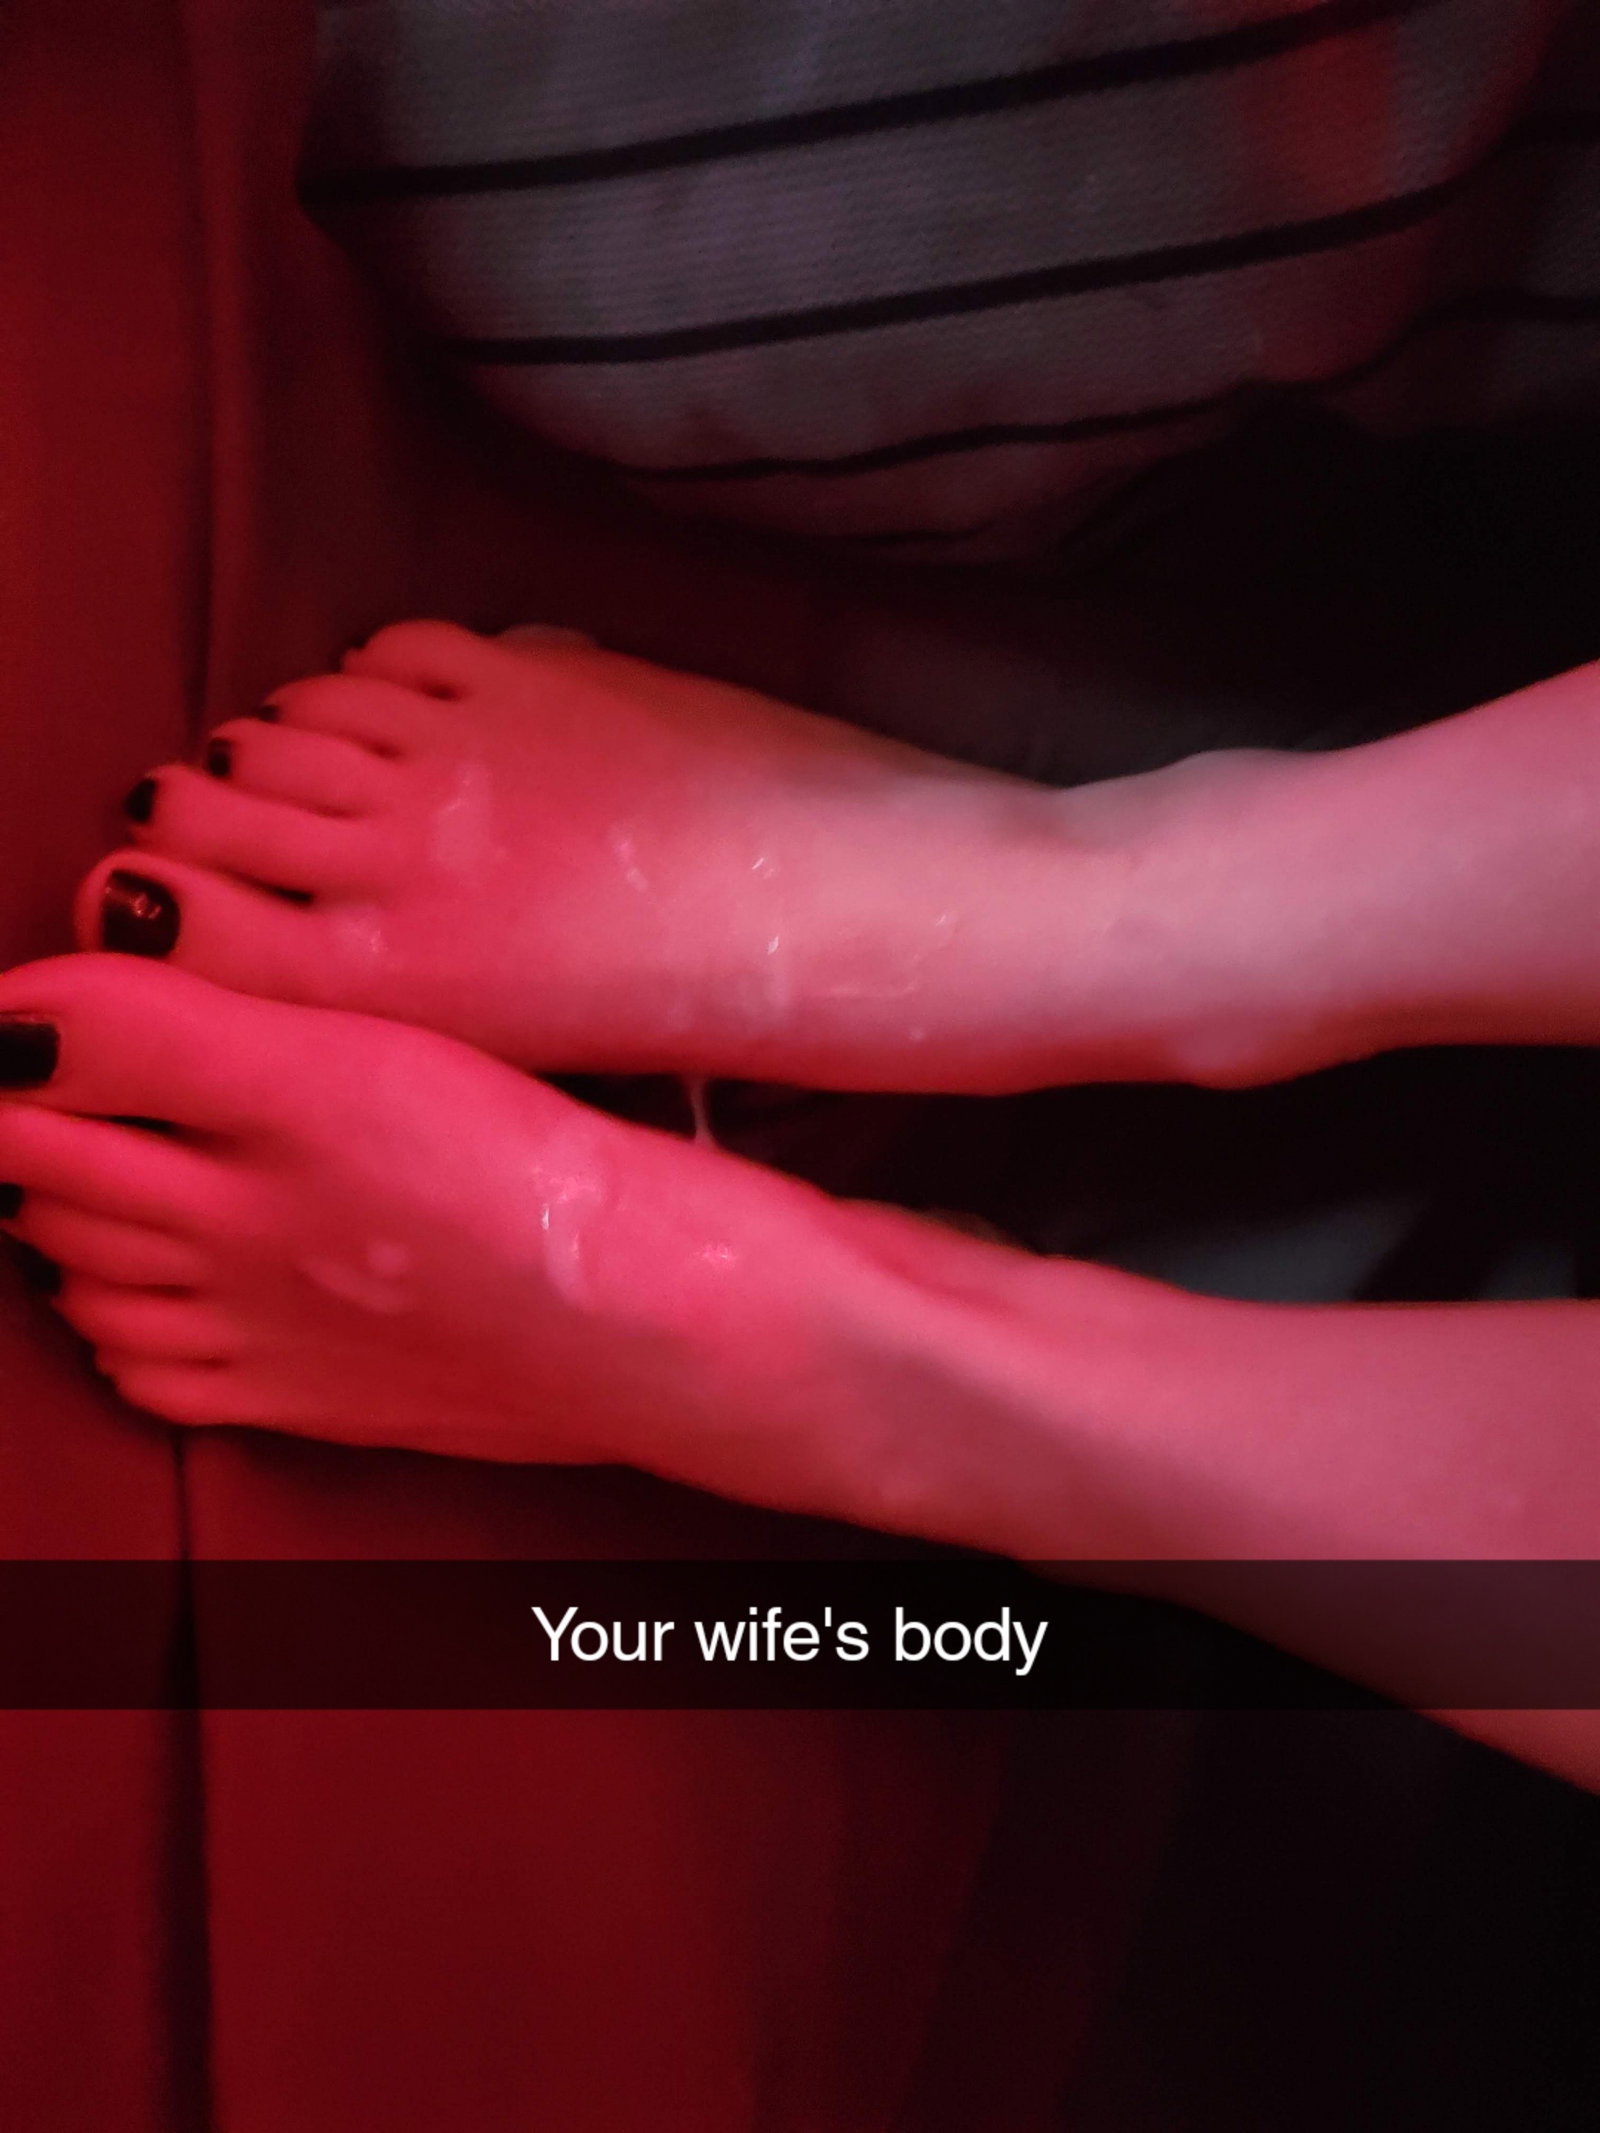 Photo by Fguccd with the username @Fguccd,  September 22, 2020 at 11:51 PM. The post is about the topic Cuckold and the text says 'I have cum on all your favorite parts of your wife's body. #cuckold #cumshot #feet #hotwife #cheating #snapchat'